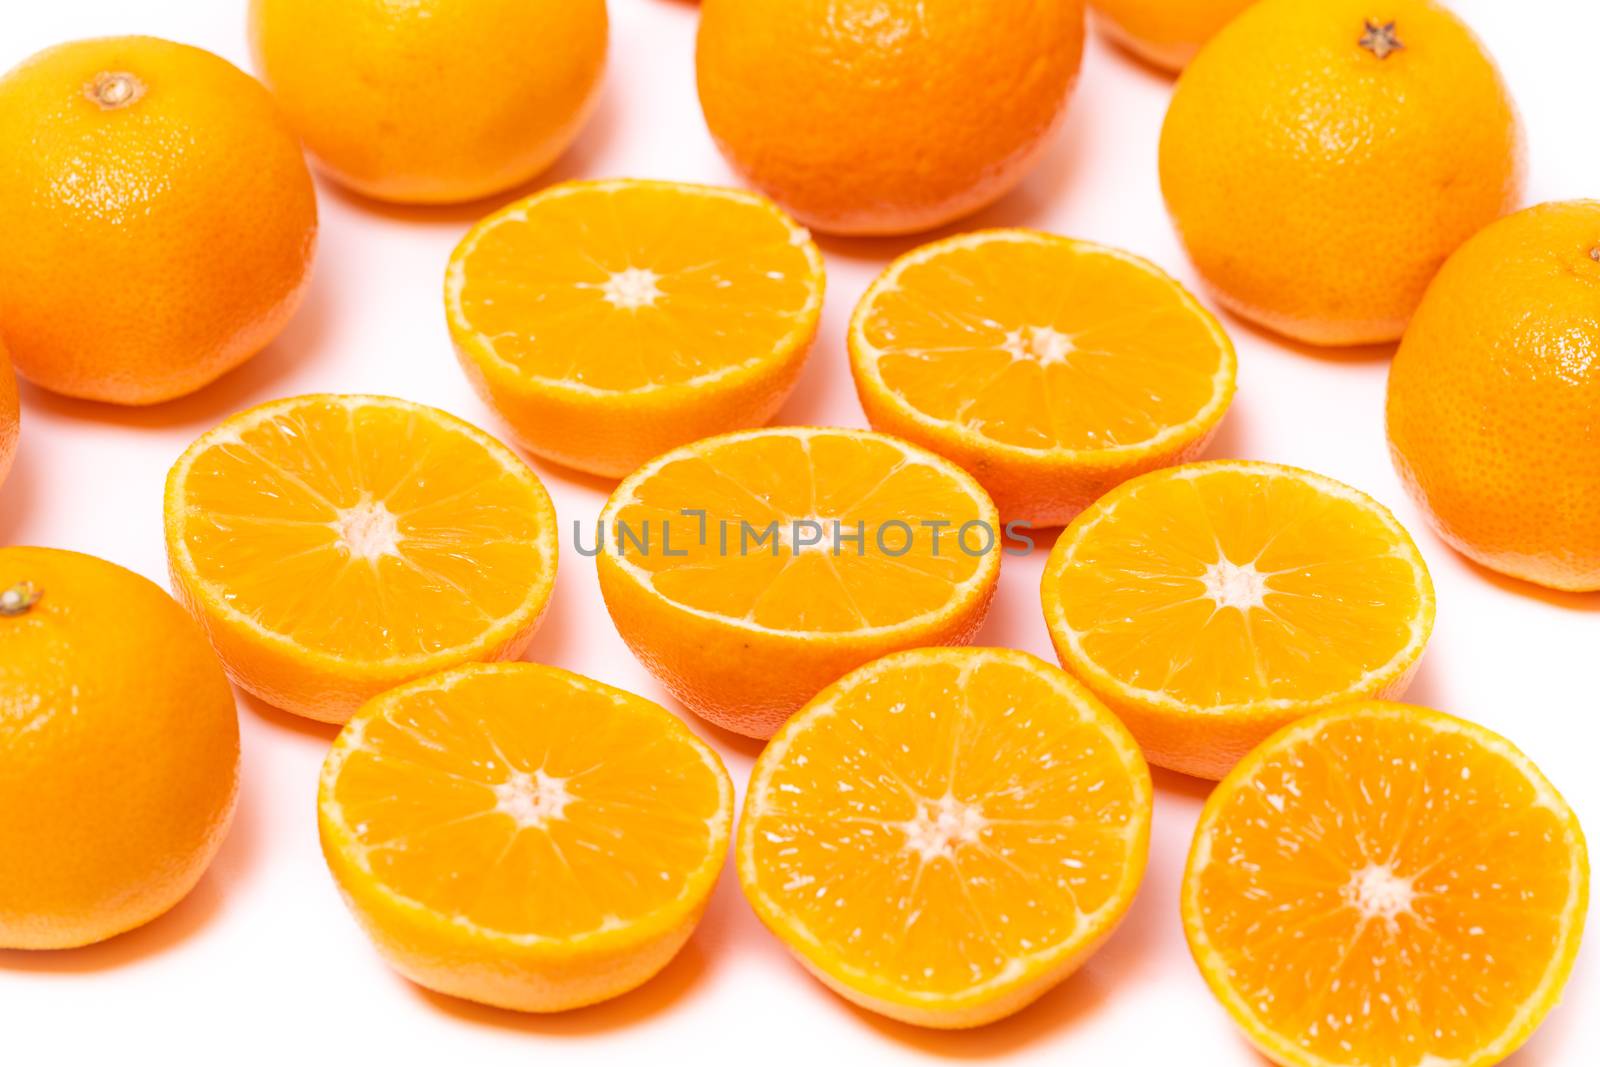 Set of round cut slices of ripe juicy organic mandarin oranges on a white background. Vitamins healthy lifestyle vegan super foods concept.